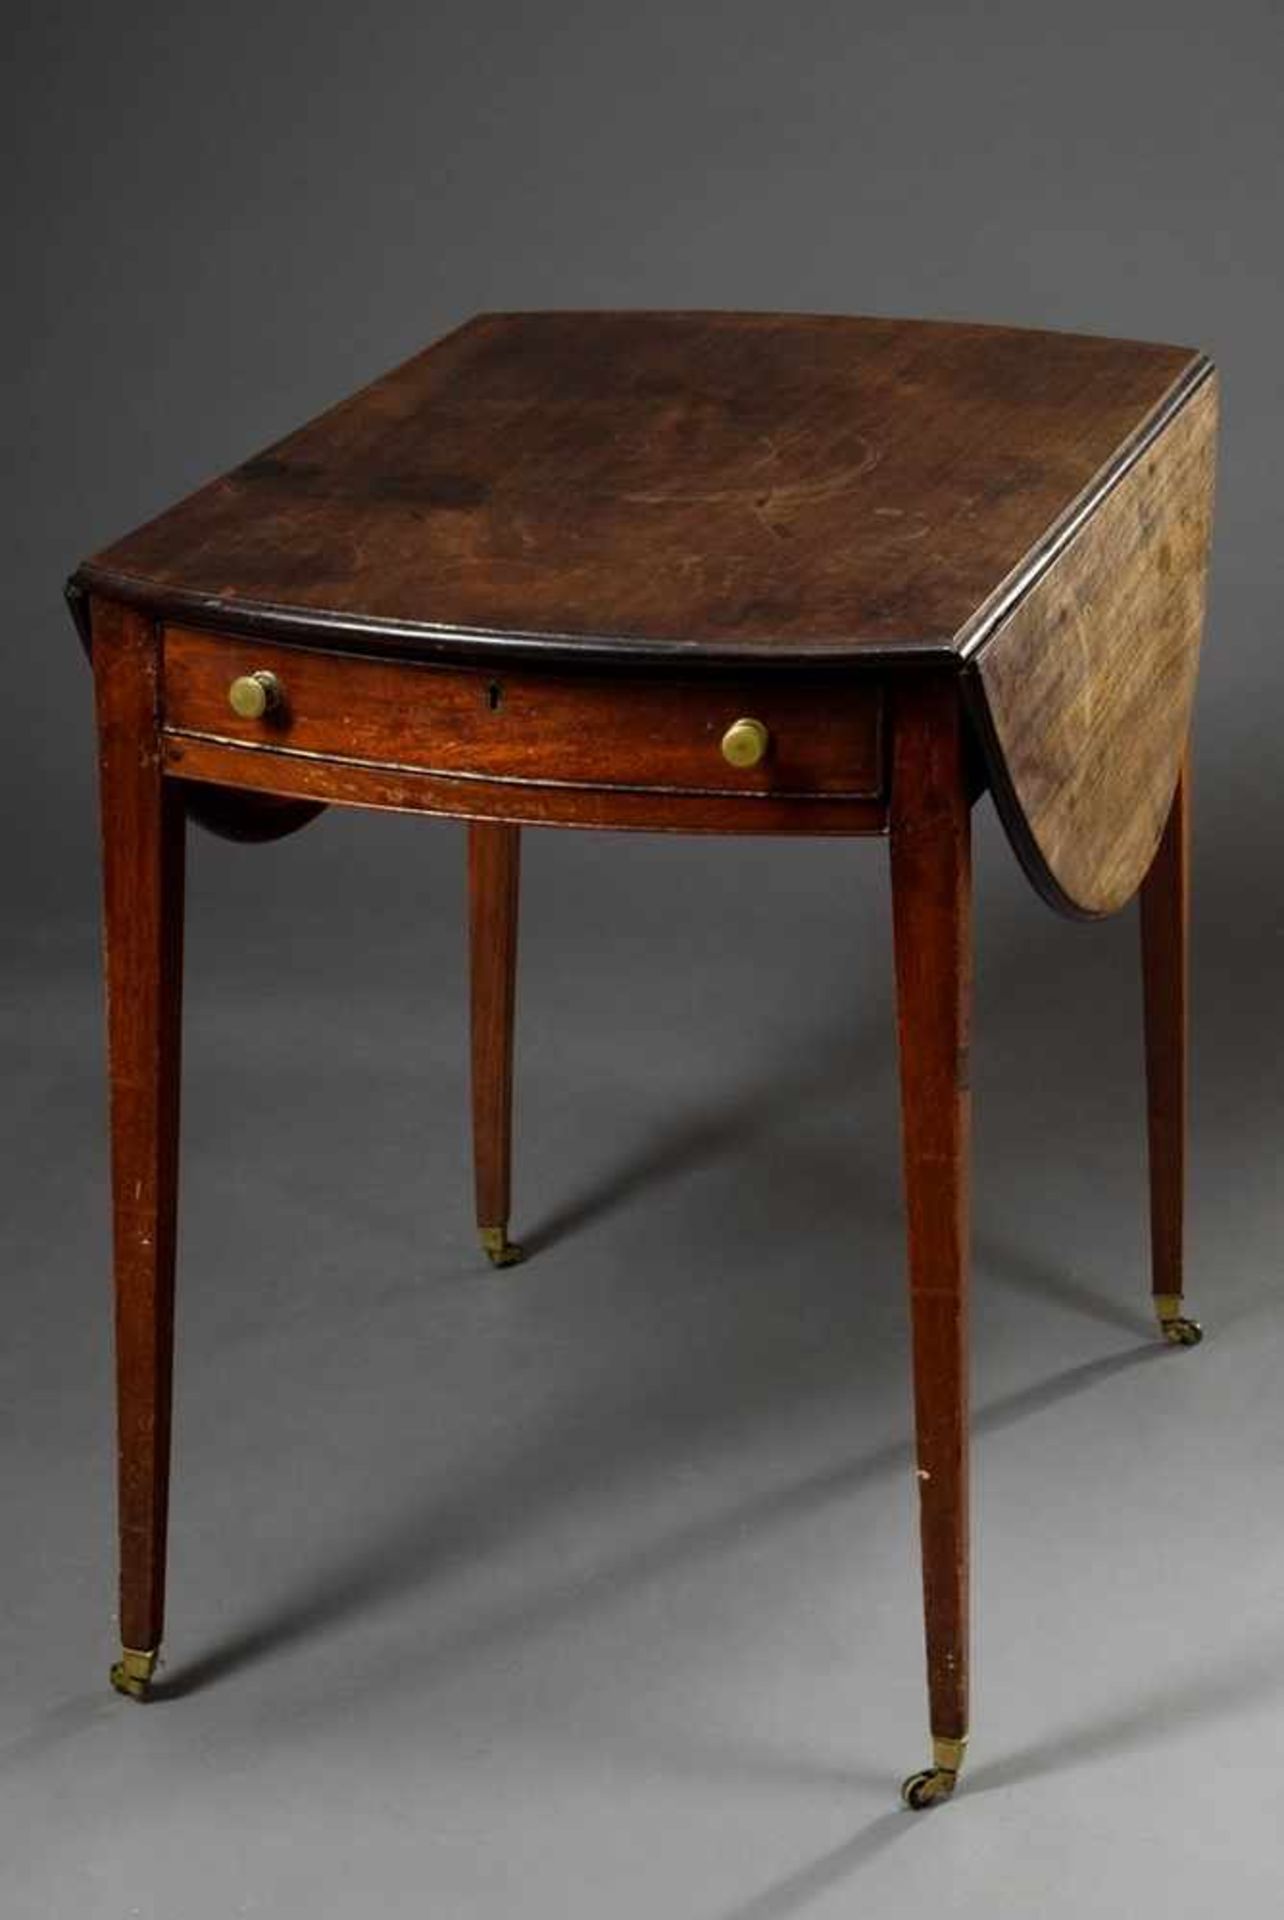 English mahogany pembroke table with semicircular side flaps and one drawer, on wheels, 19th